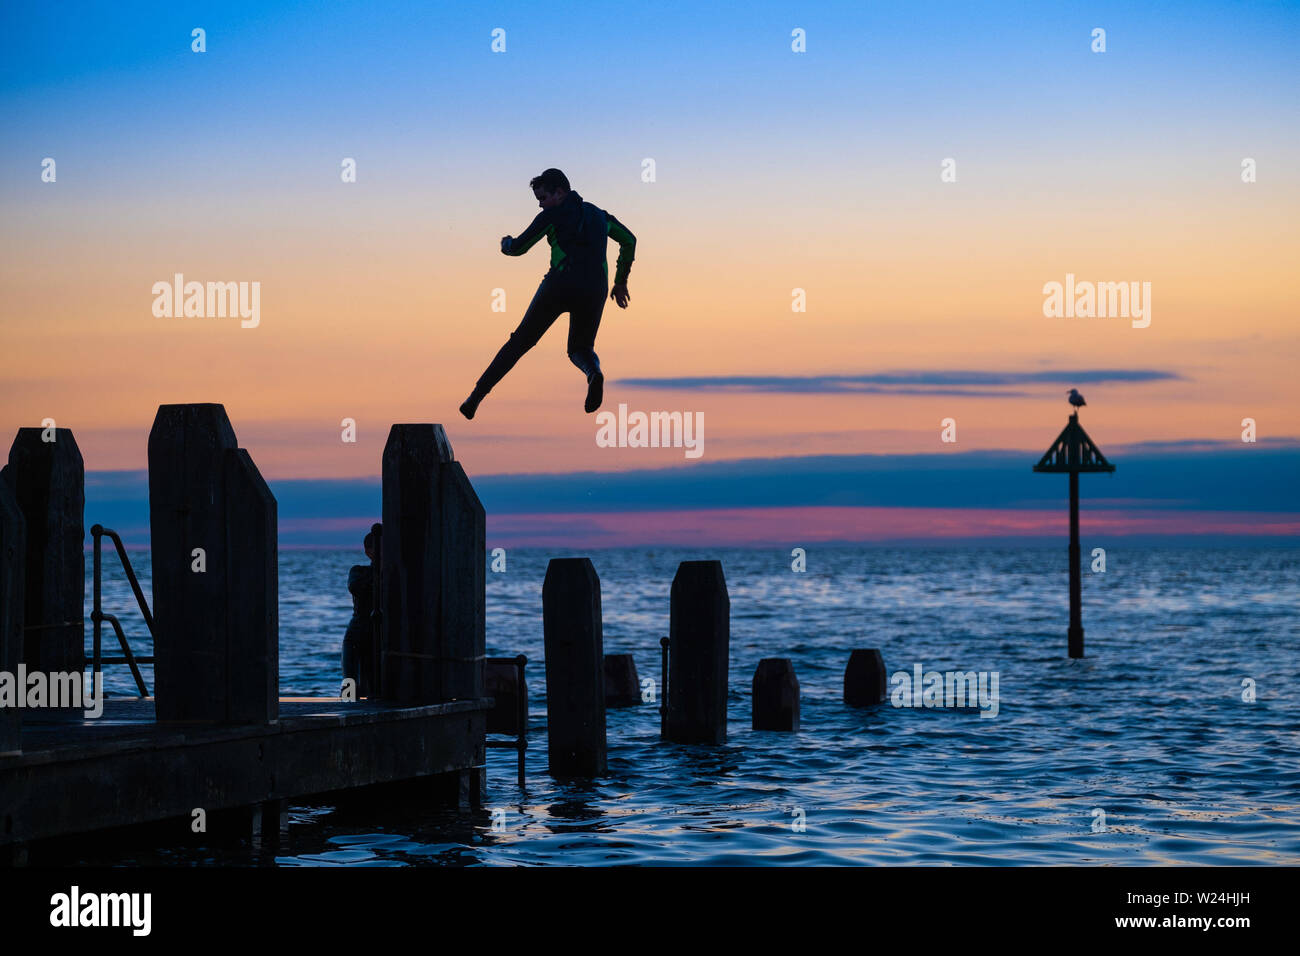 Aberystwyth Wales UK, Friday 05 July 2019  UK Weather: In the fading light at the end of a day of hot sunshine, two youngsters cool off by jumping acrobatically  into the sea off the wooden jetty in Aberystwyth on the Cardigan Bay coast, west Wales.   photo credit: Keith Morris/Alamy Live News Stock Photo